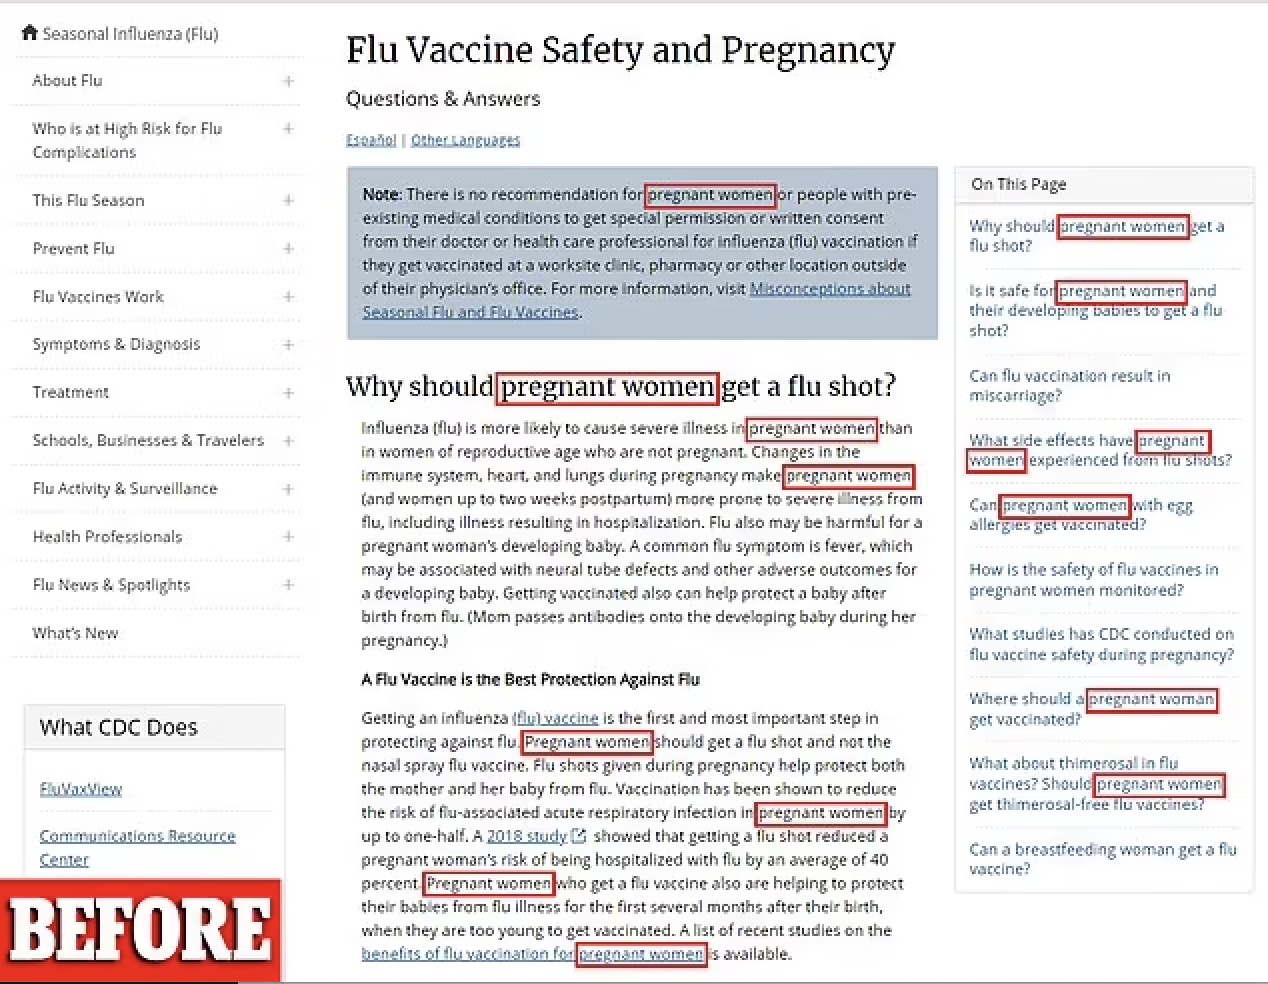 CDC Quietly Replaces ‘Pregnant Women’ with Woke Gender Neutral Term ‘Pregnant People’ in Flu Guidance